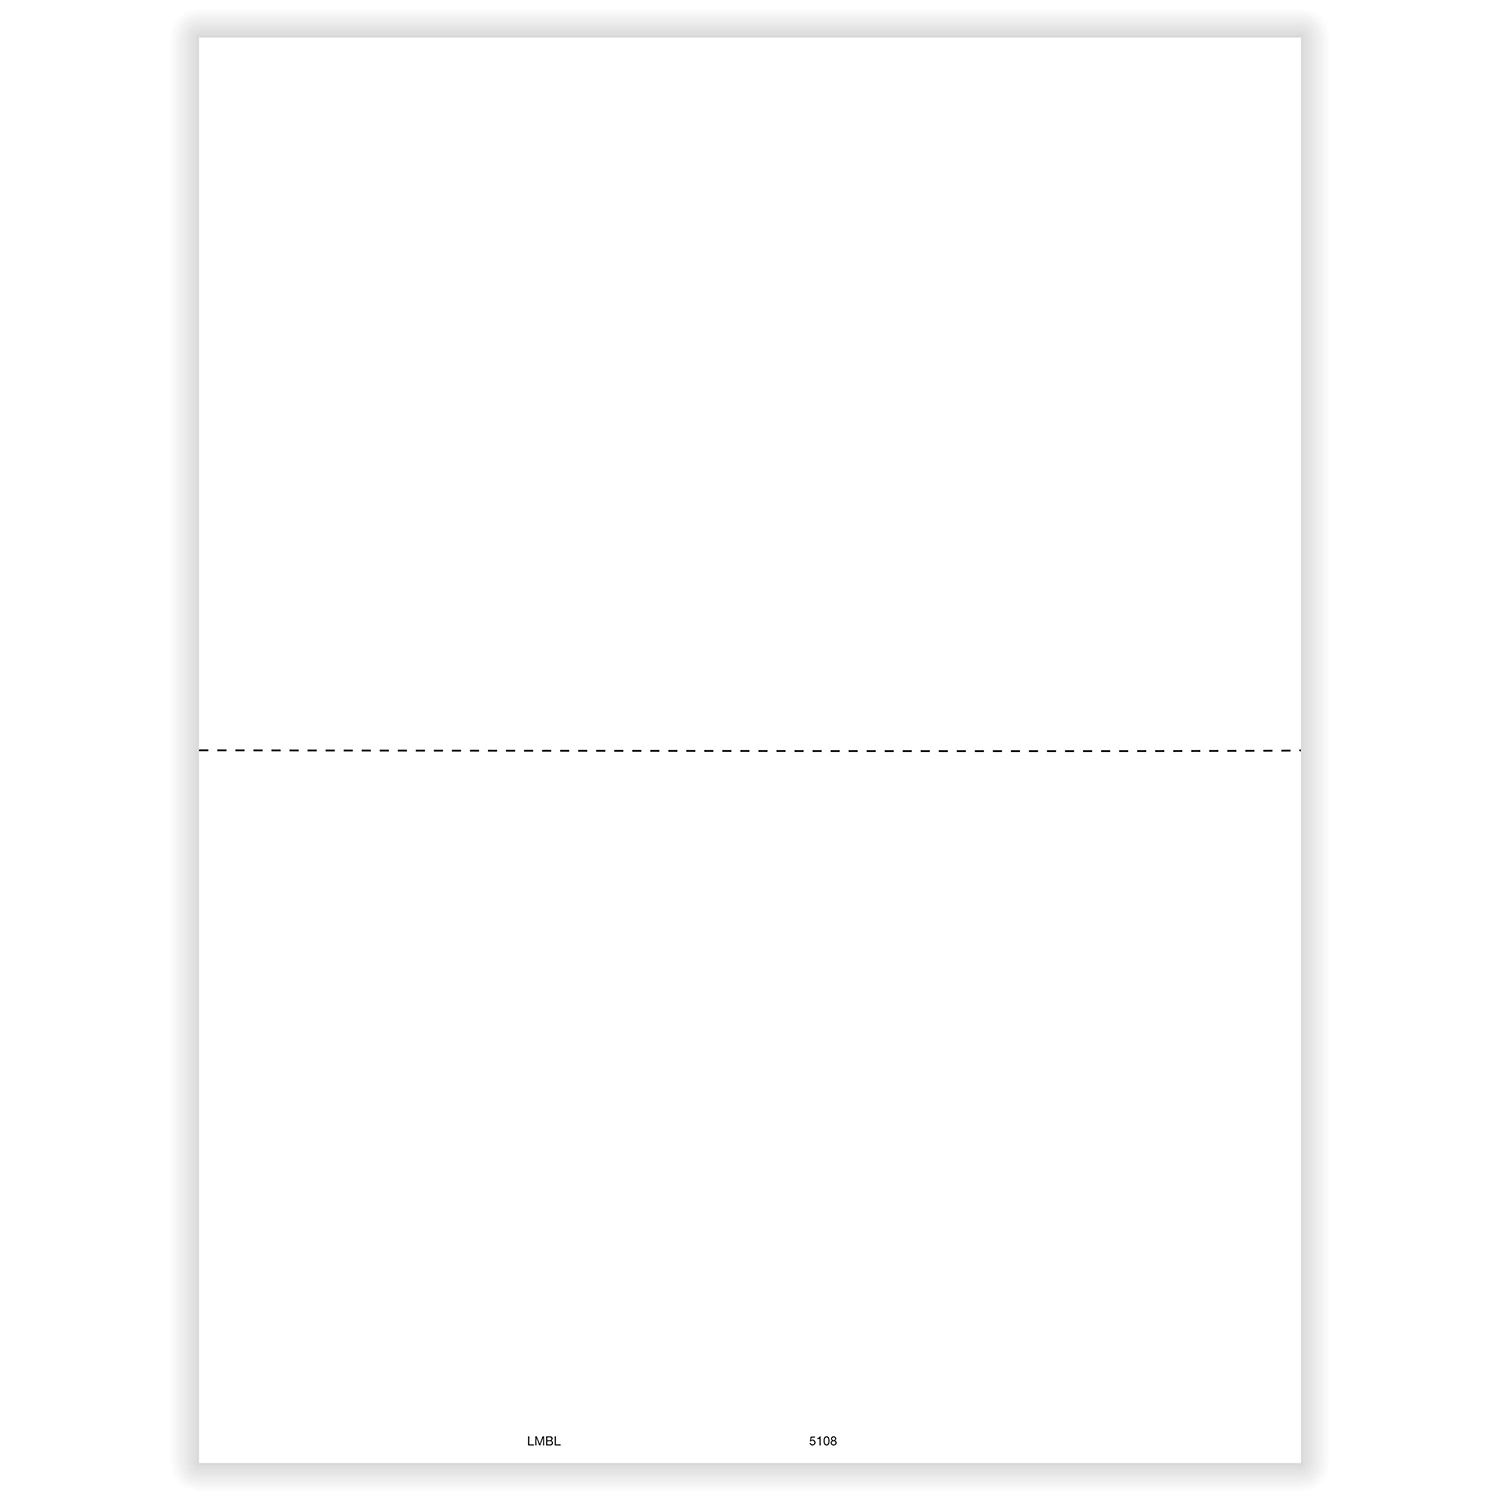 Picture of 1099-MISC Blank, Copy B, 2-Up, w/ Backer Instructions